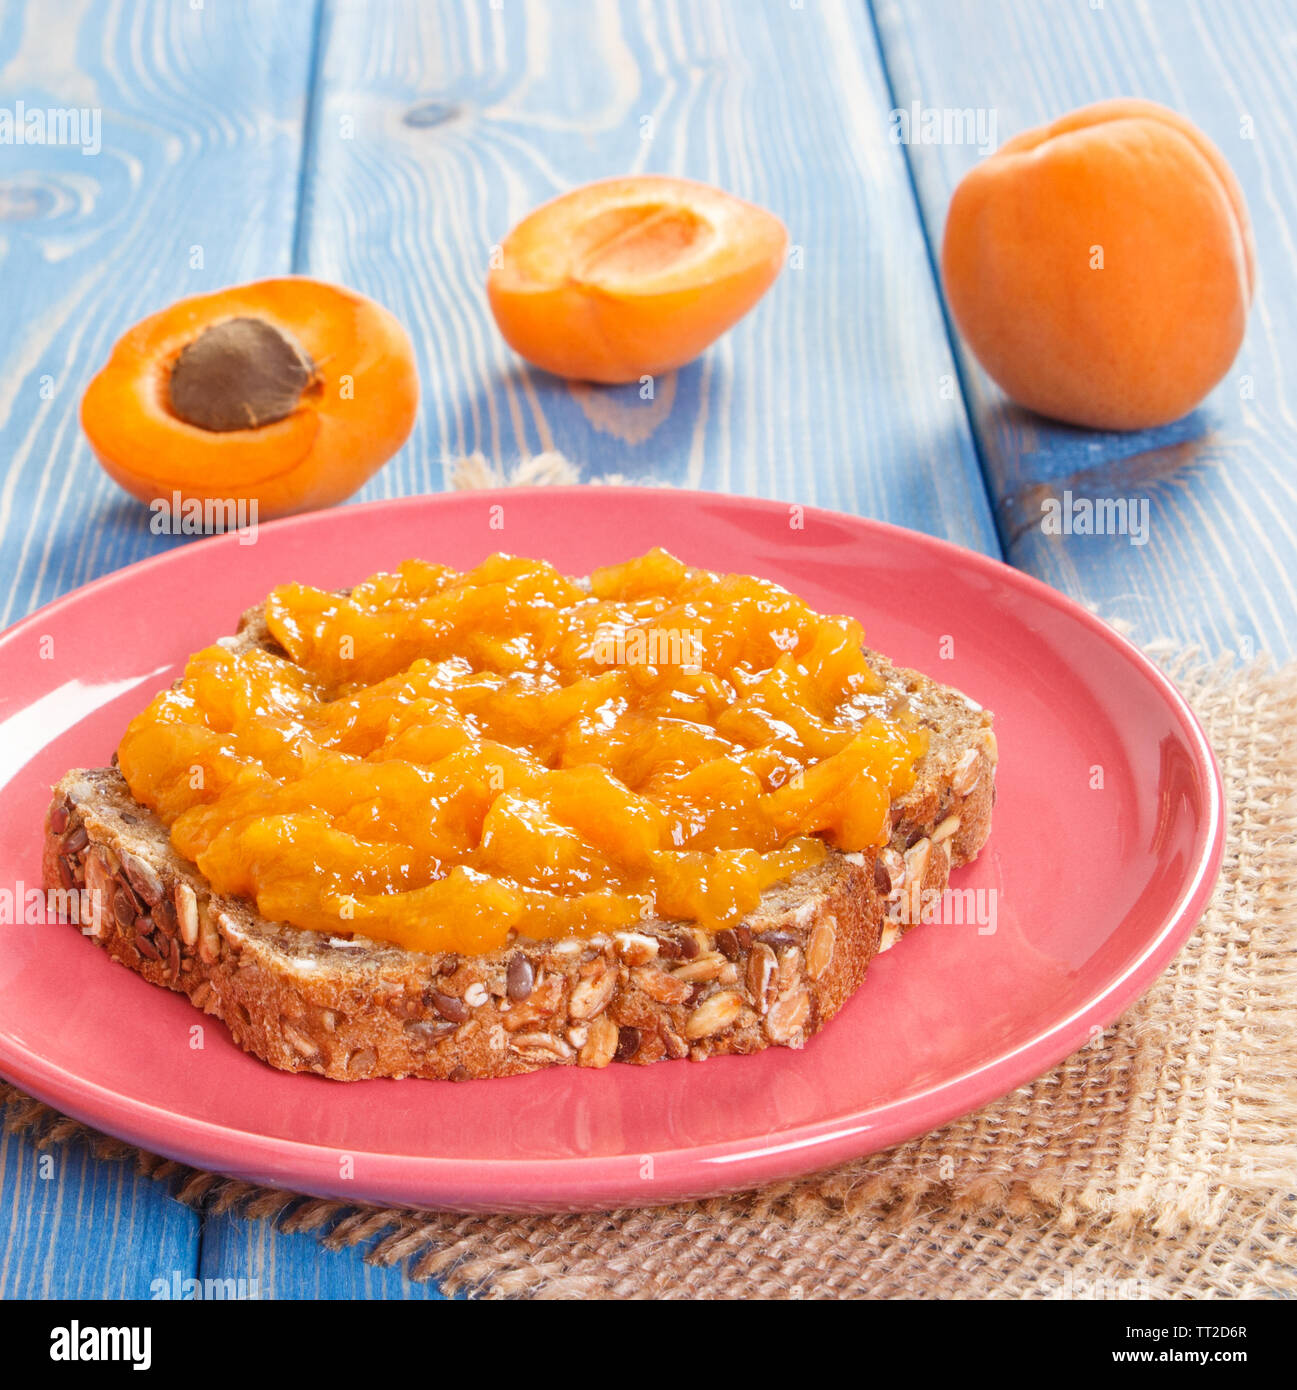 Sandwich with apricot jam or marmalade on plate, concept of healthy sweet dessert Stock Photo